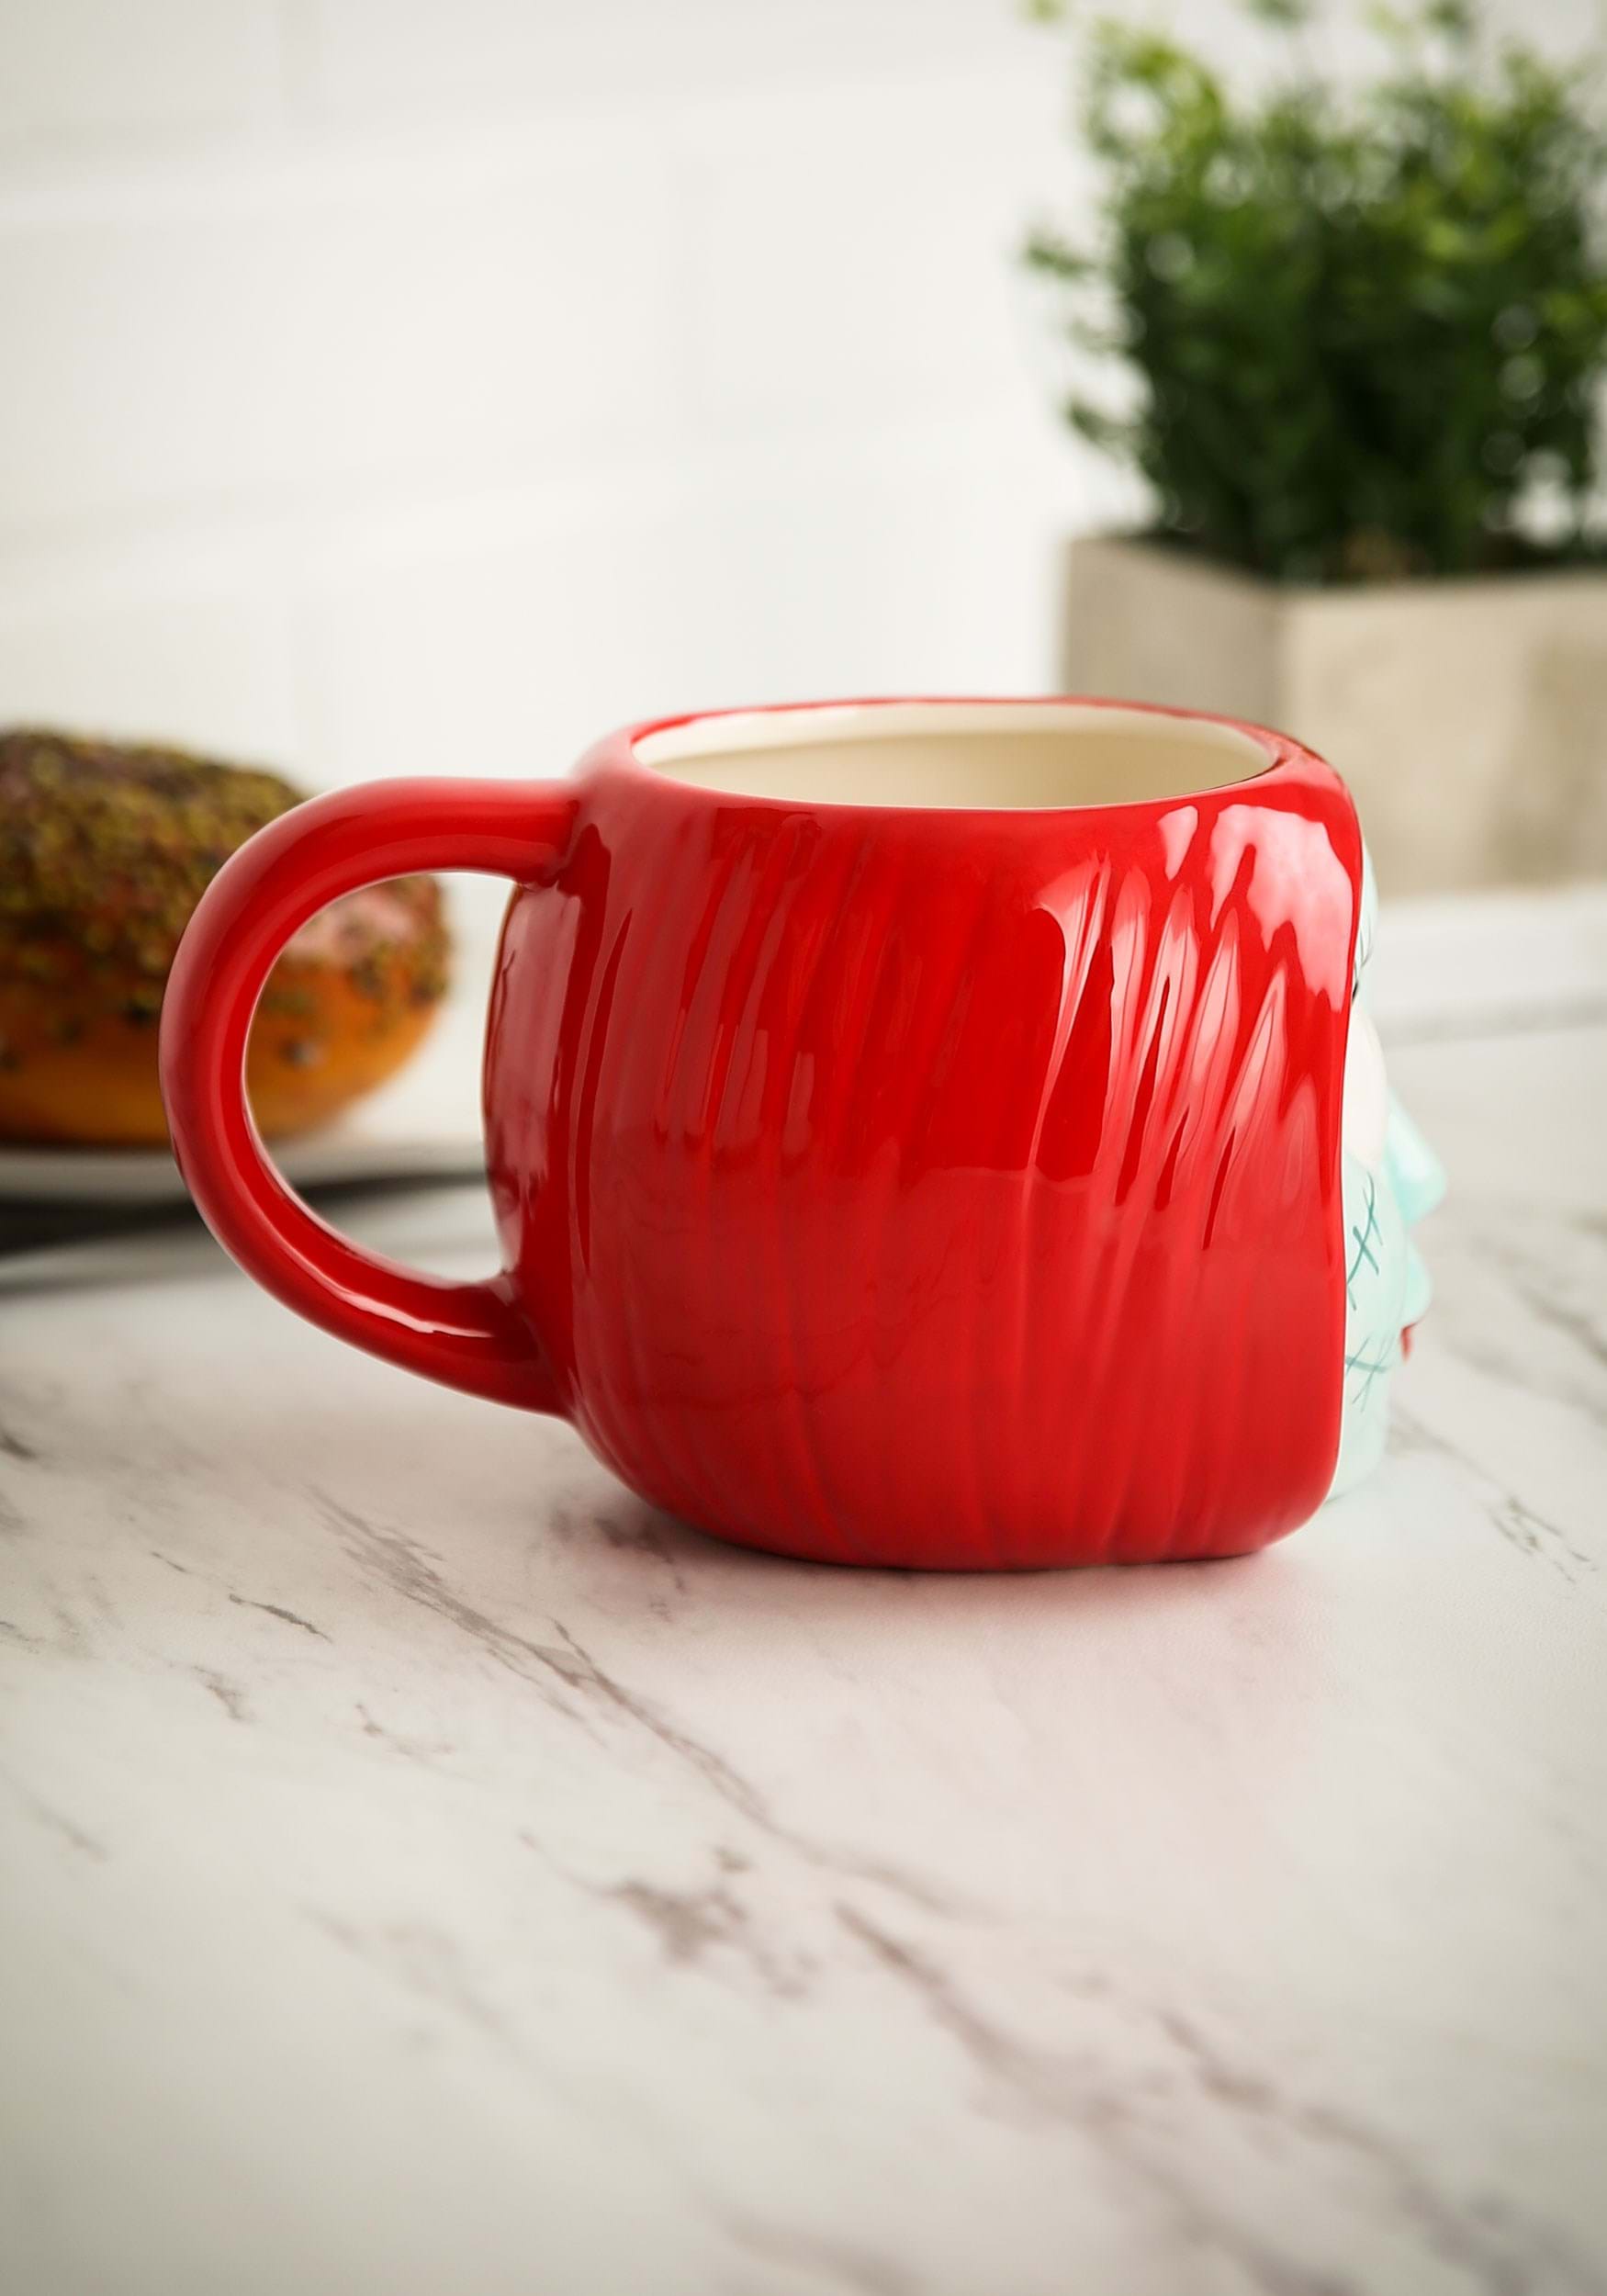 https://images.fun.com/products/46265/2-1-85738/before-christmas-sally-sculpted-ceramic-mug-alt-2-upd.jpg